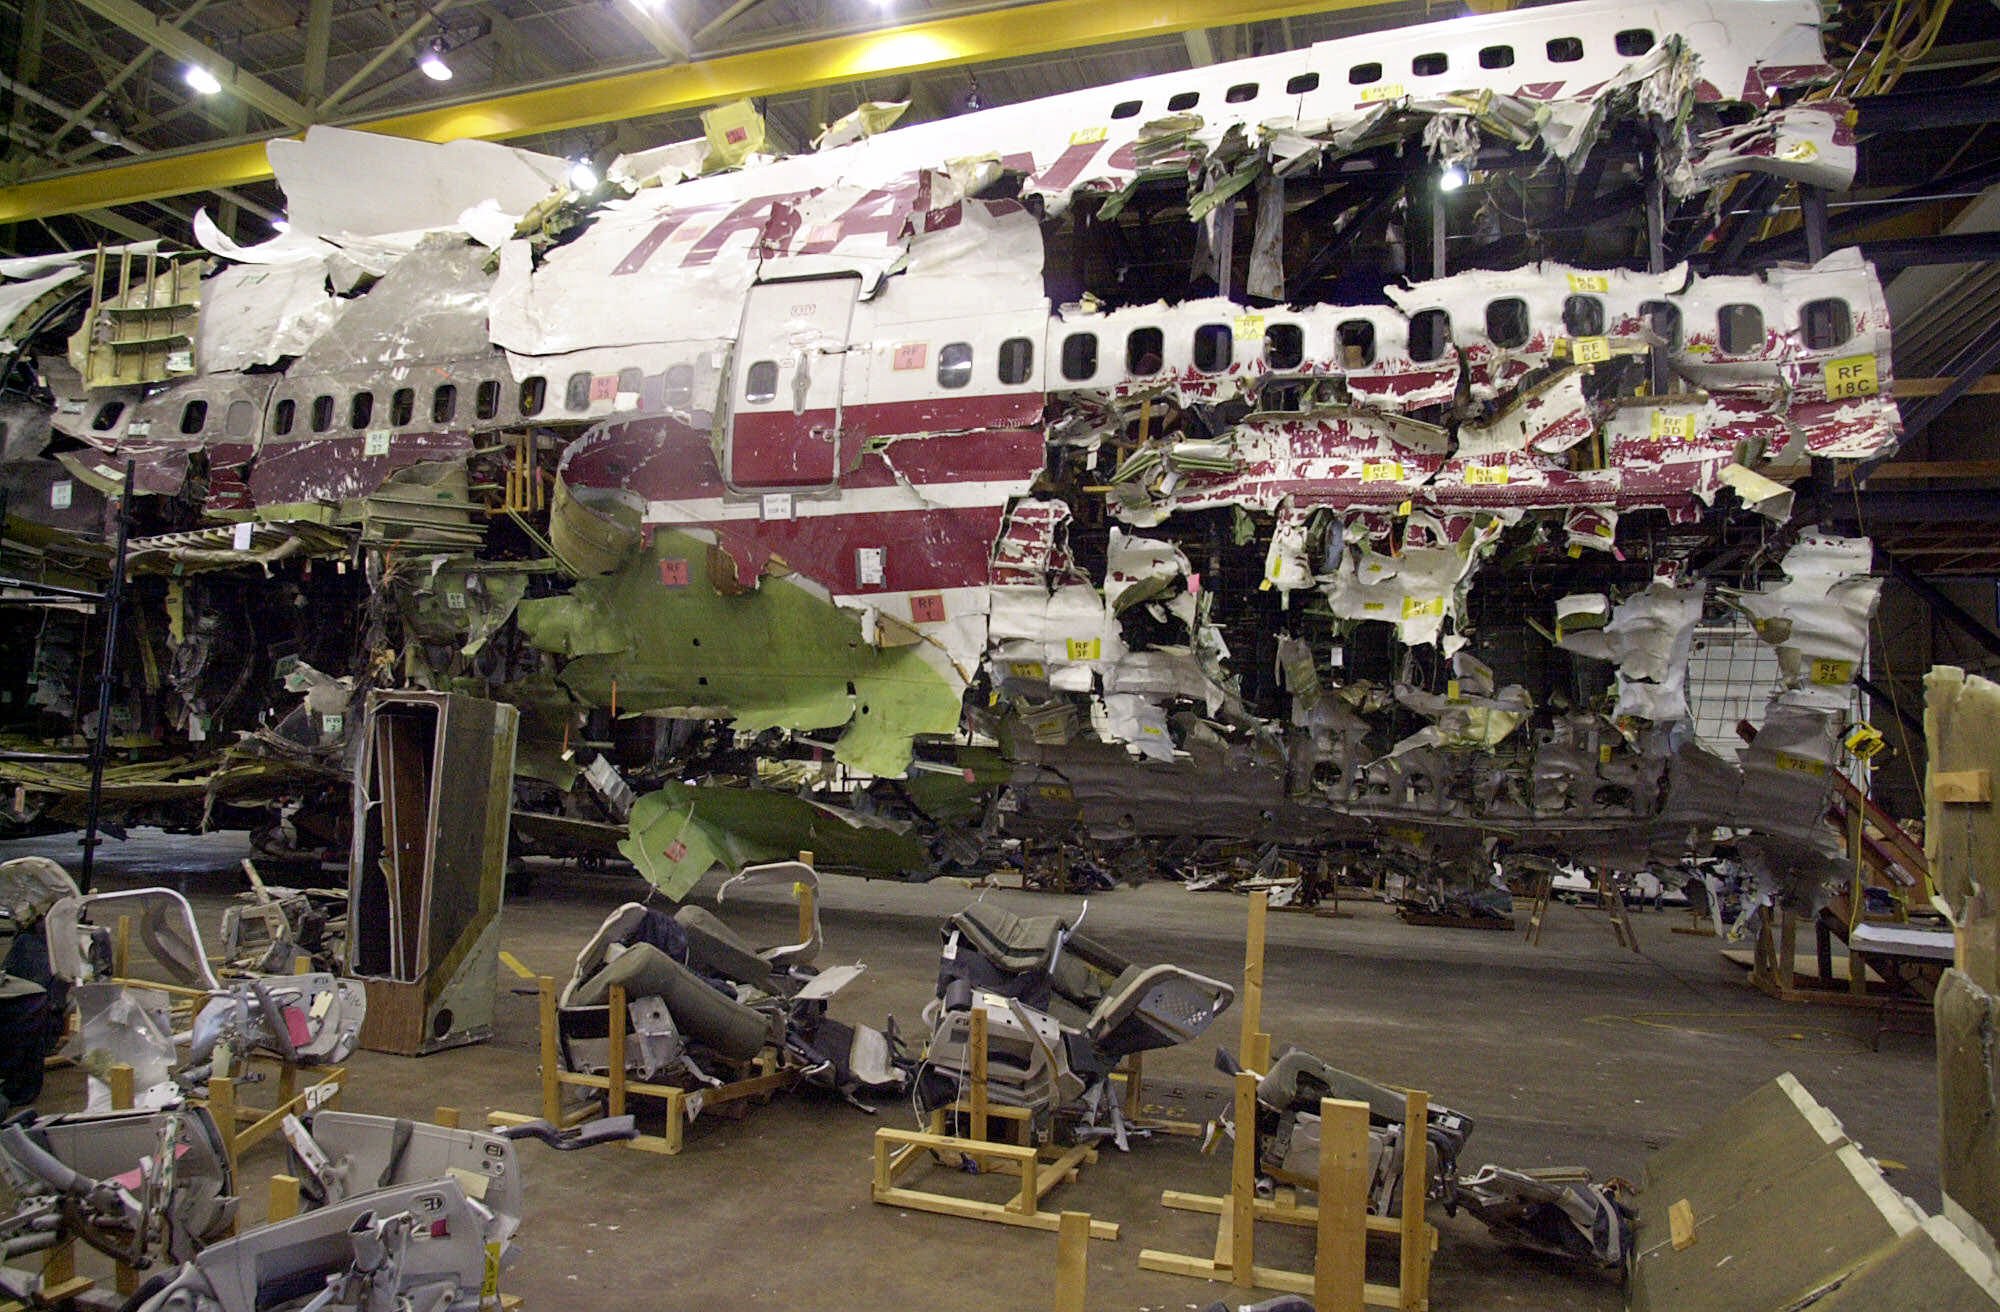 Reconstruction of TWA Flight 800 to be destroyed 25 years after deadly  explosion